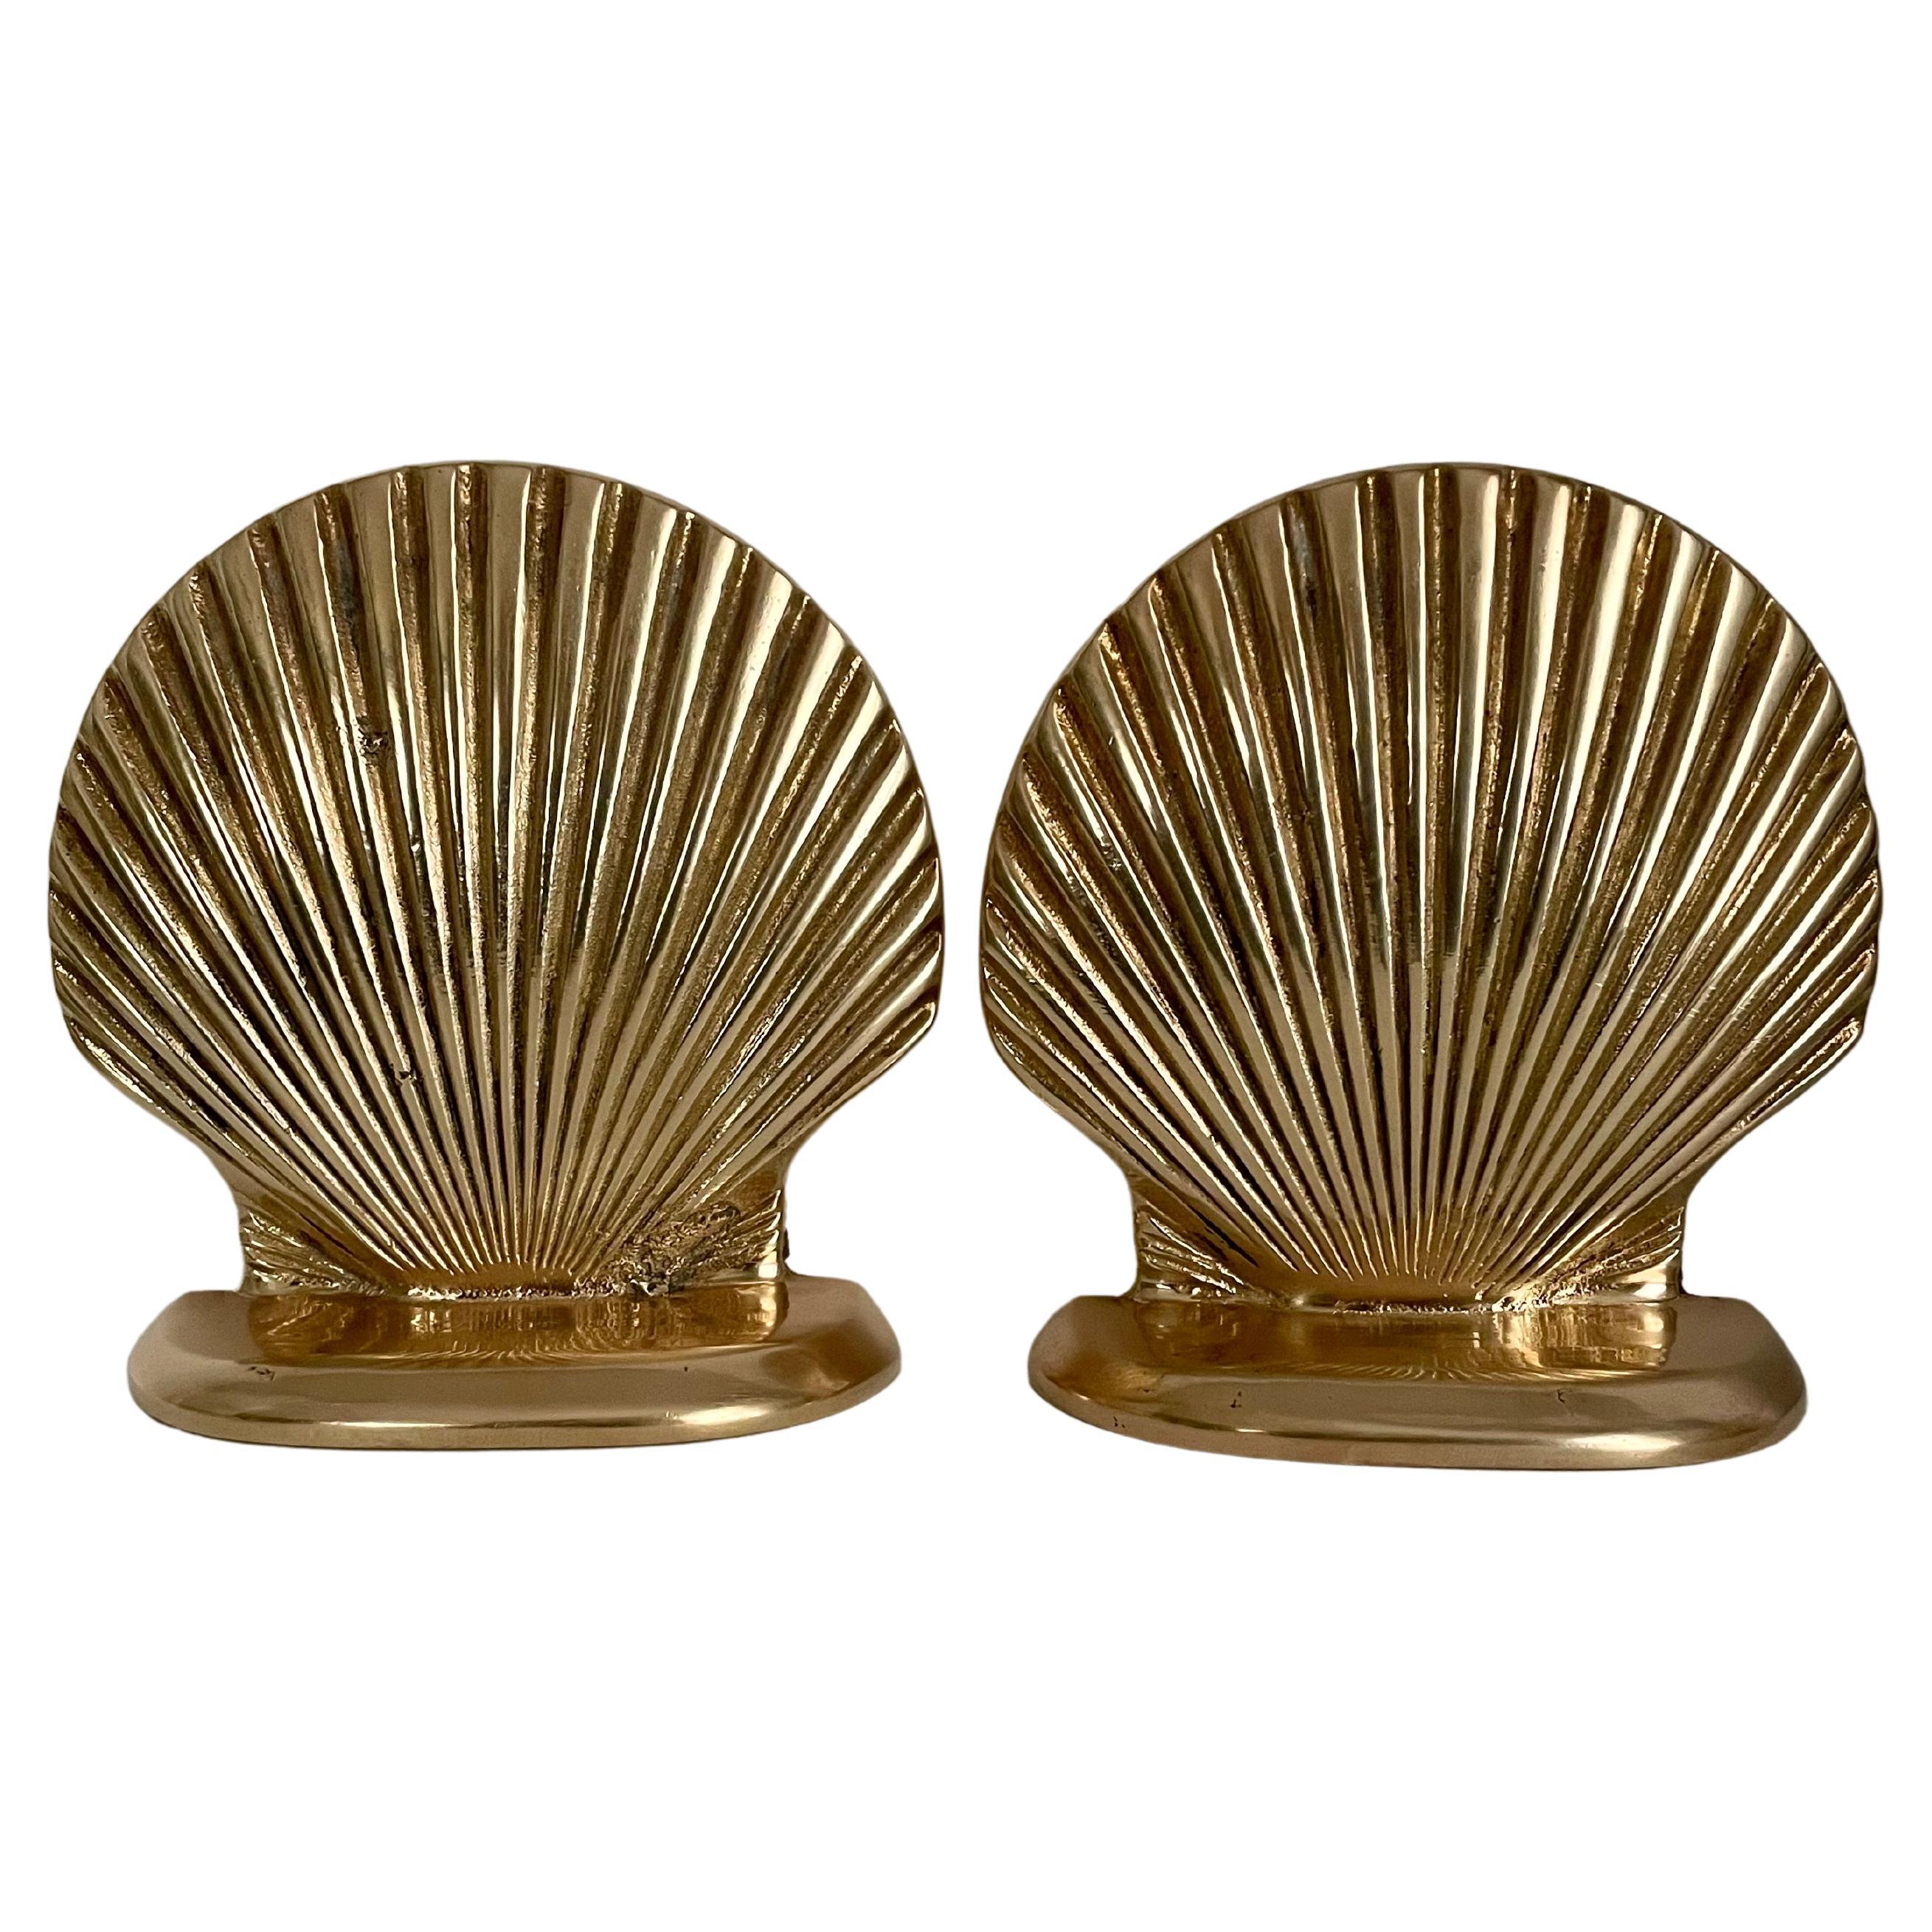 Vintage Brass Clam or Scallop Shell Seashell Bookends